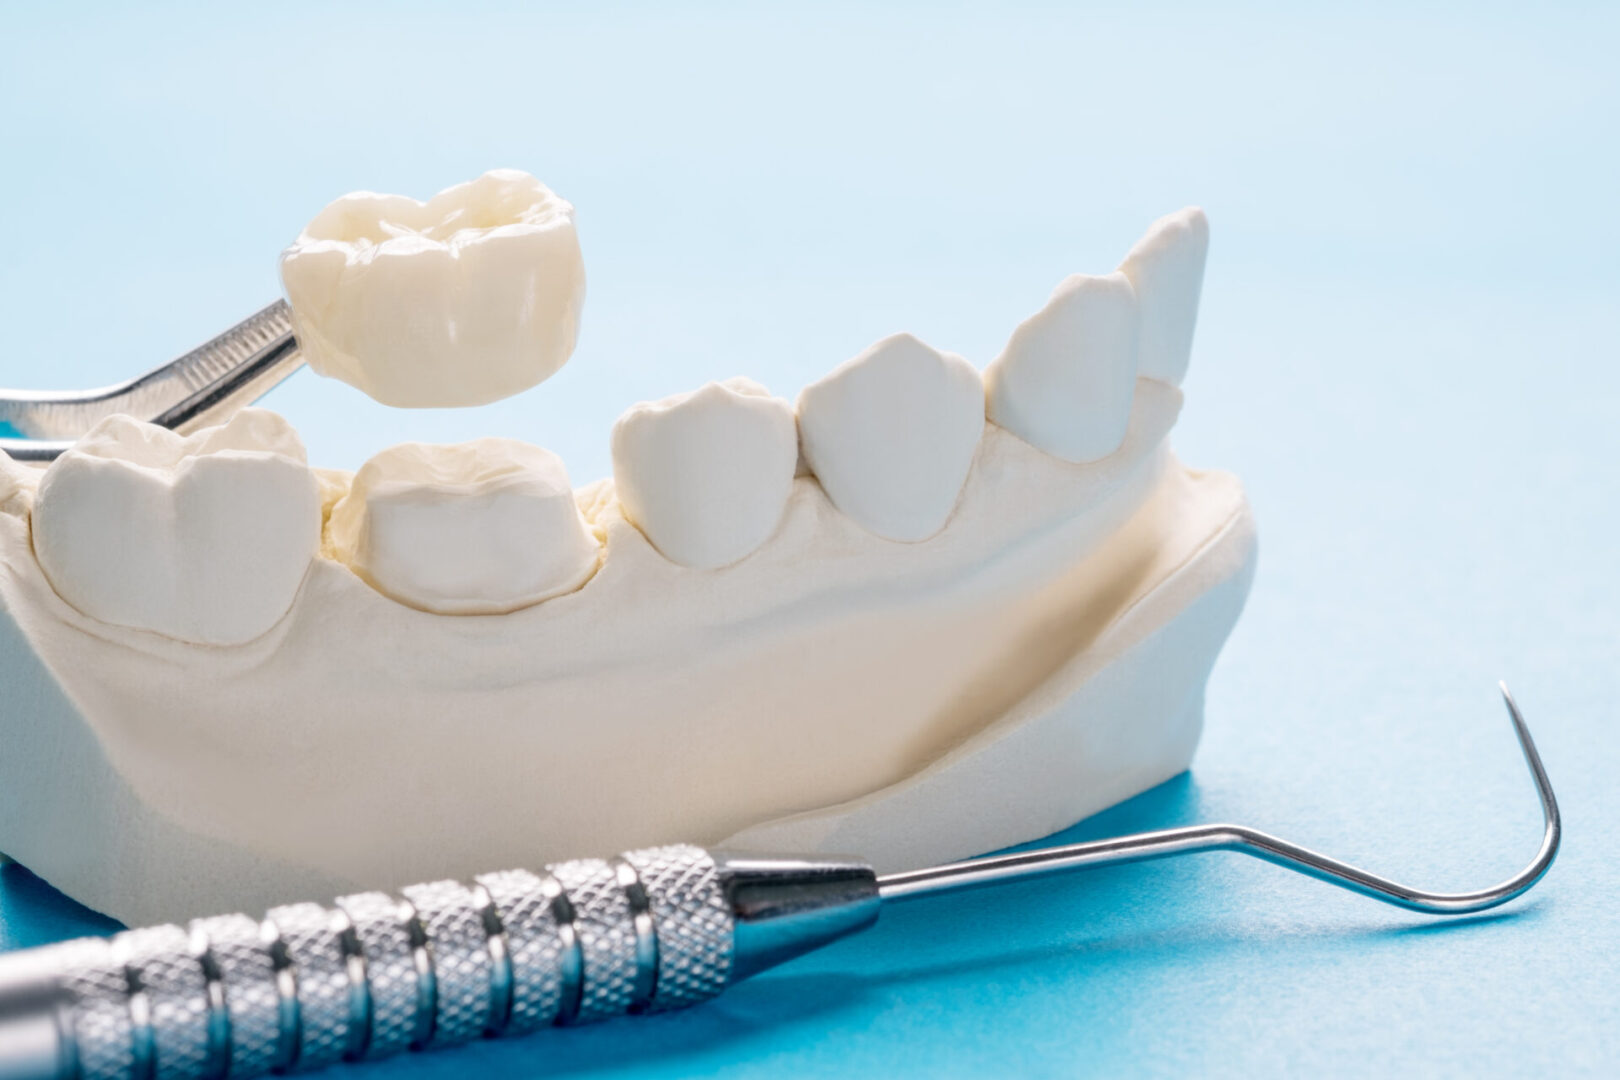 A dental model with a tooth brush and paste